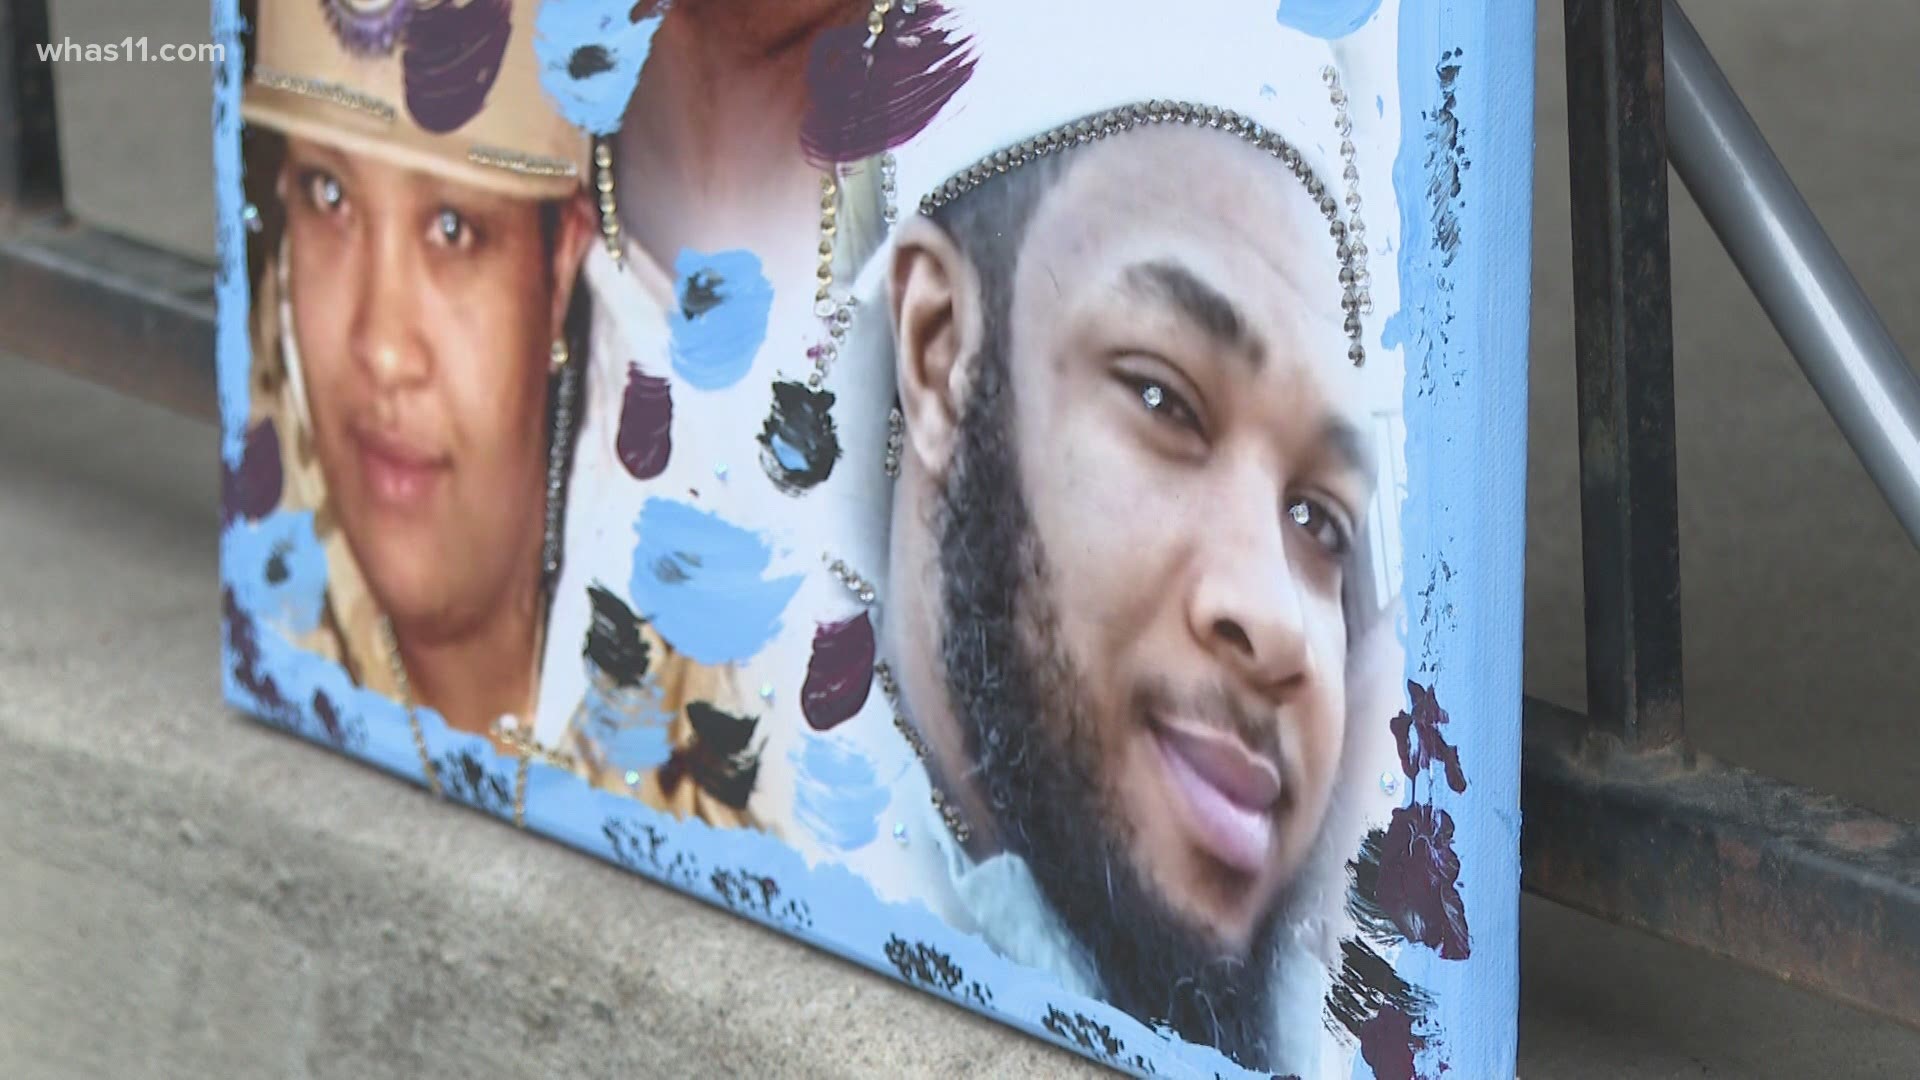 Keyona Burks family is looking for answers after he was shot multiple times and killed in a drive-by shooting outside a Family Dollar on Wilson Avenue.